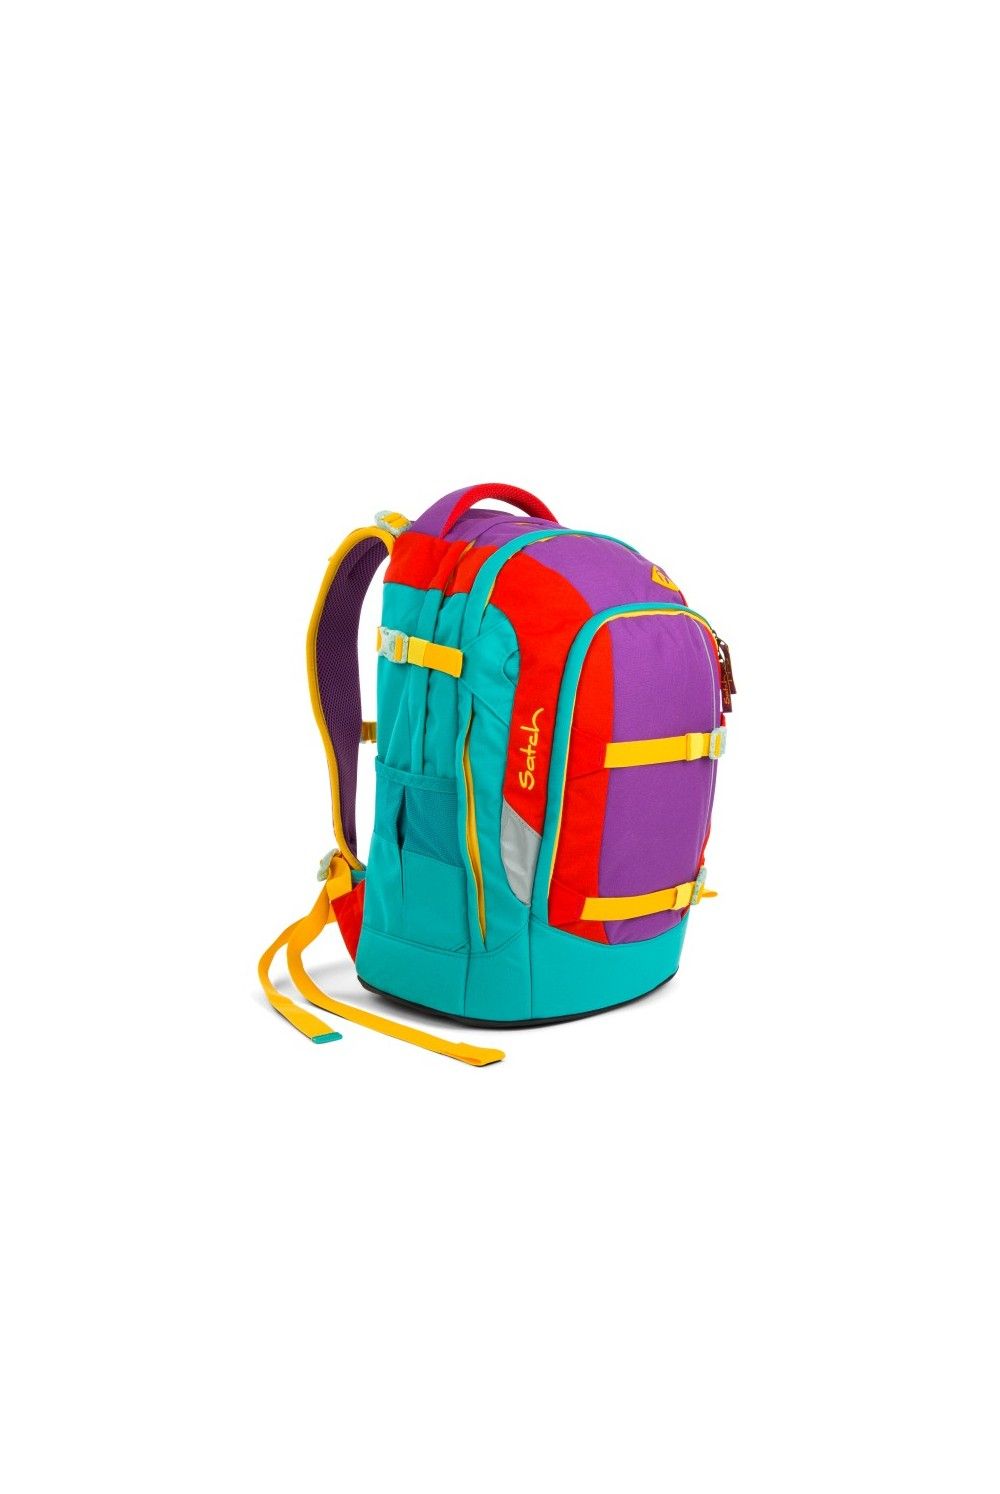 Sac à dos scolaire Satch Flash Runner